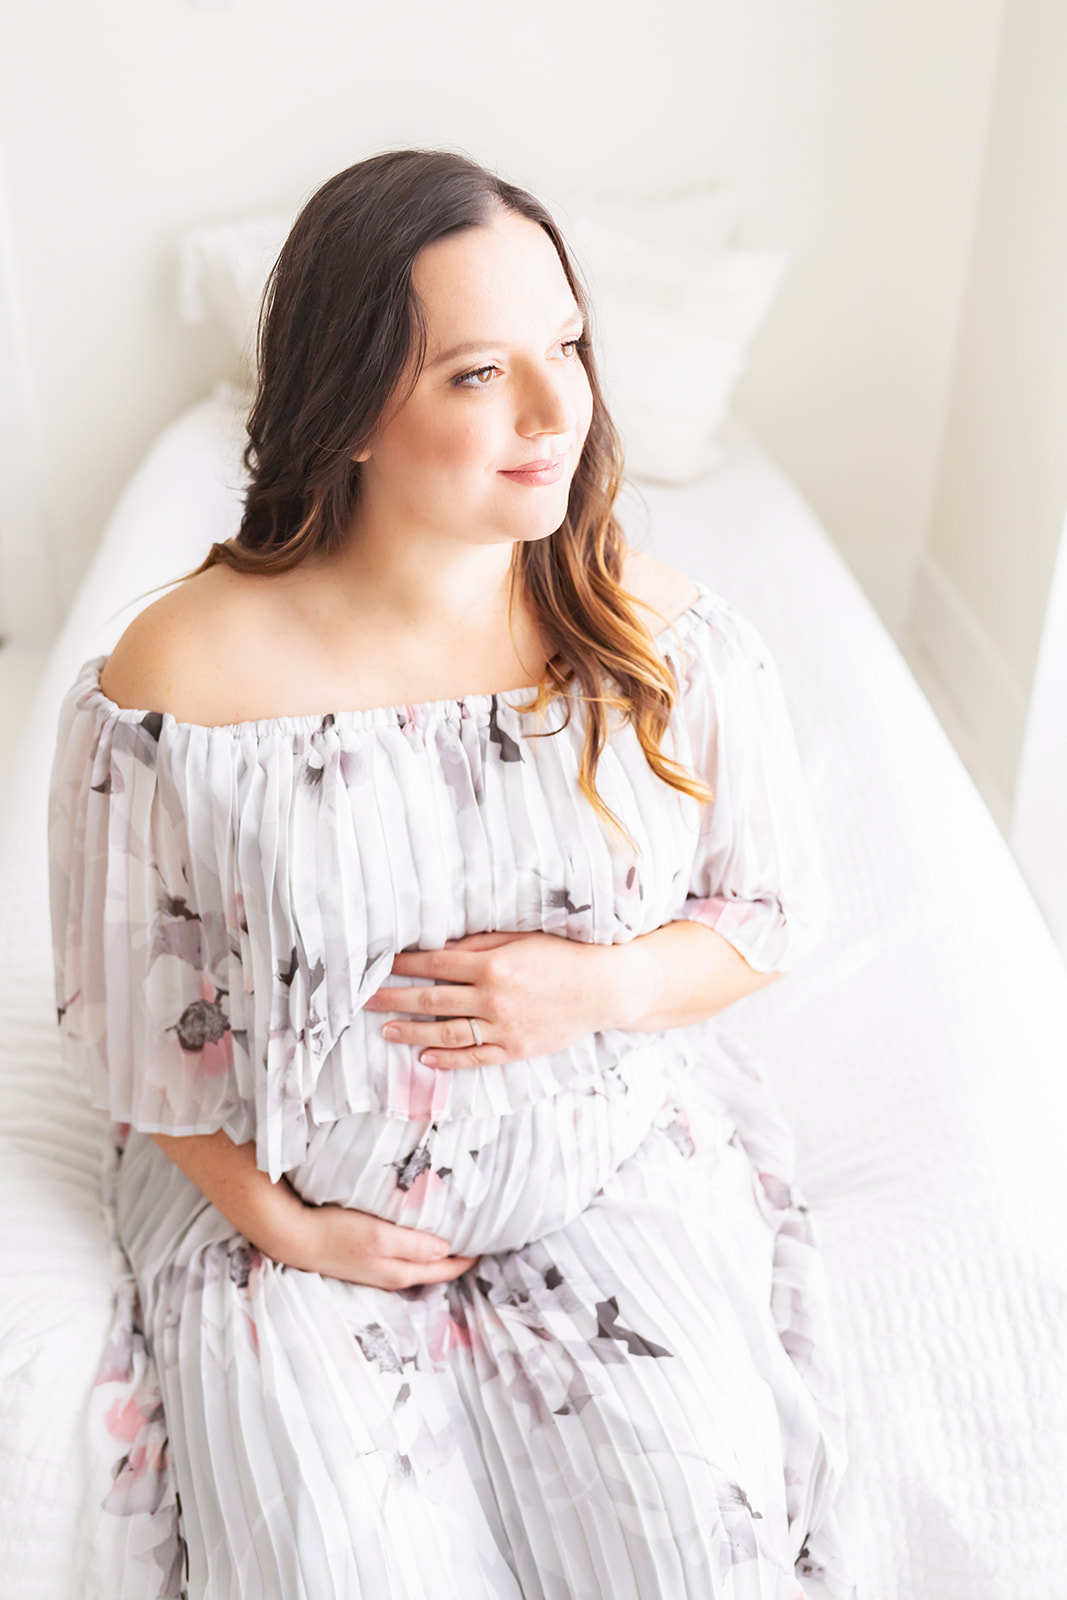 A mom to be sits on the edge of a bed holding her bump gazing out a window